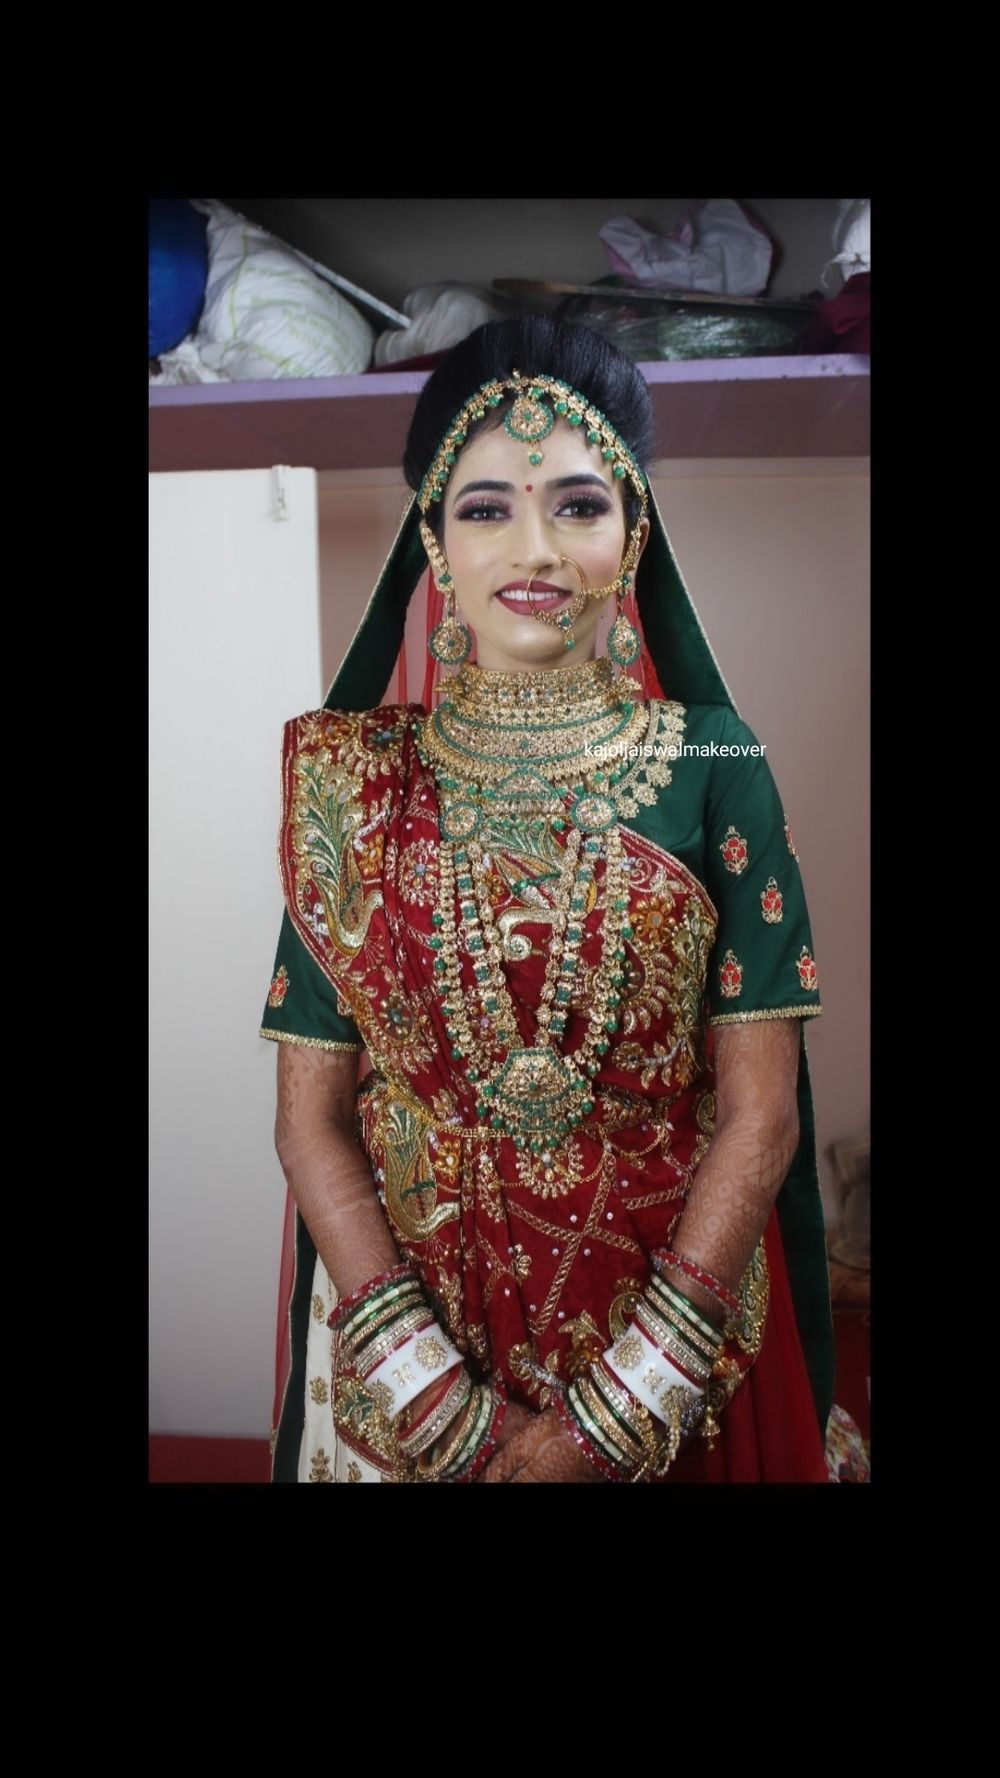 Photo From Brides - By Kajol Jaiswal Makeover